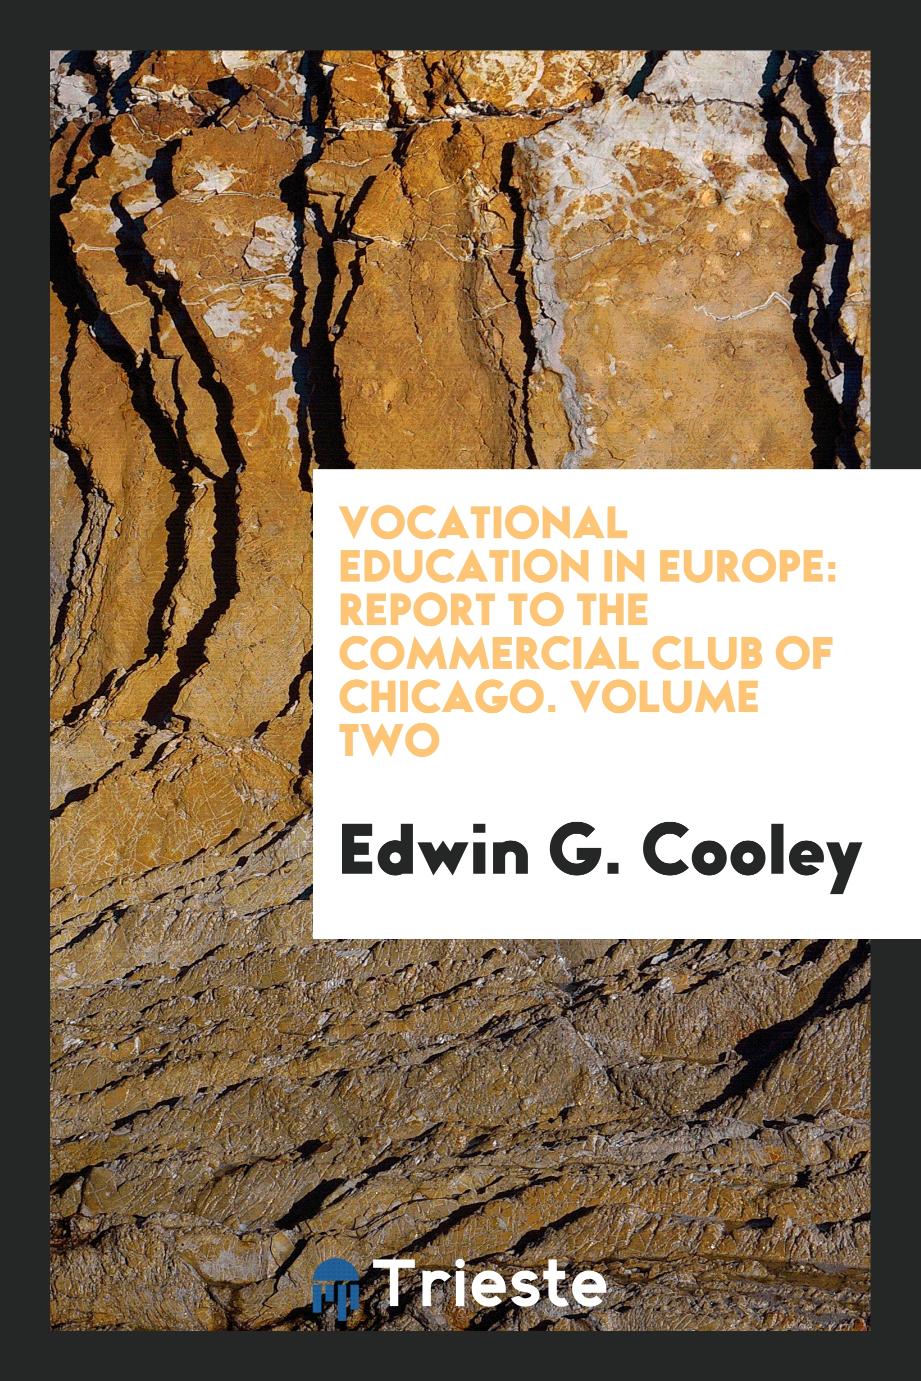 Vocational Education in Europe: Report to the Commercial Club of Chicago. Volume Two